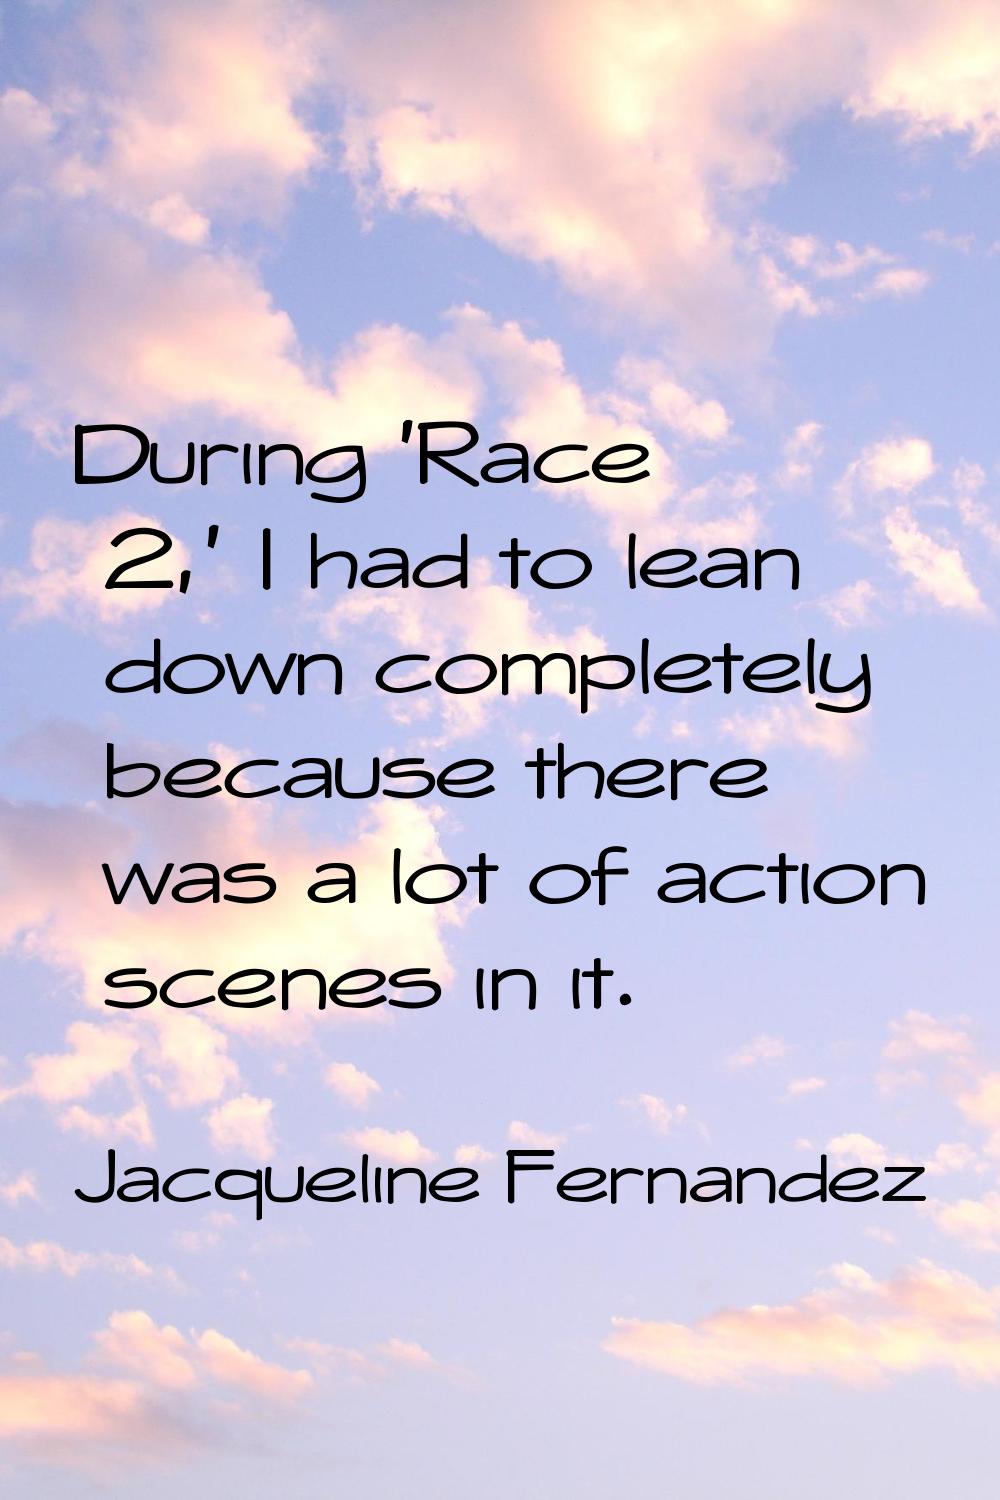 During 'Race 2,' I had to lean down completely because there was a lot of action scenes in it.